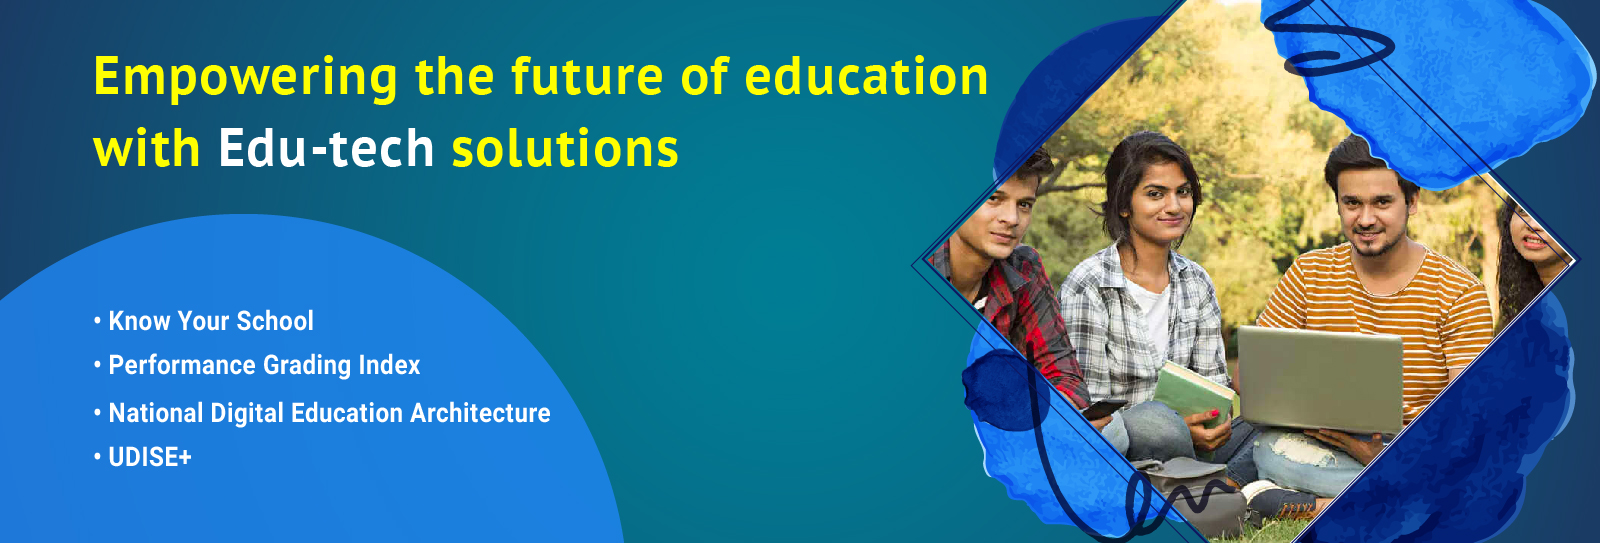 Image of Empowering the future of education with Edu-tech Solutions